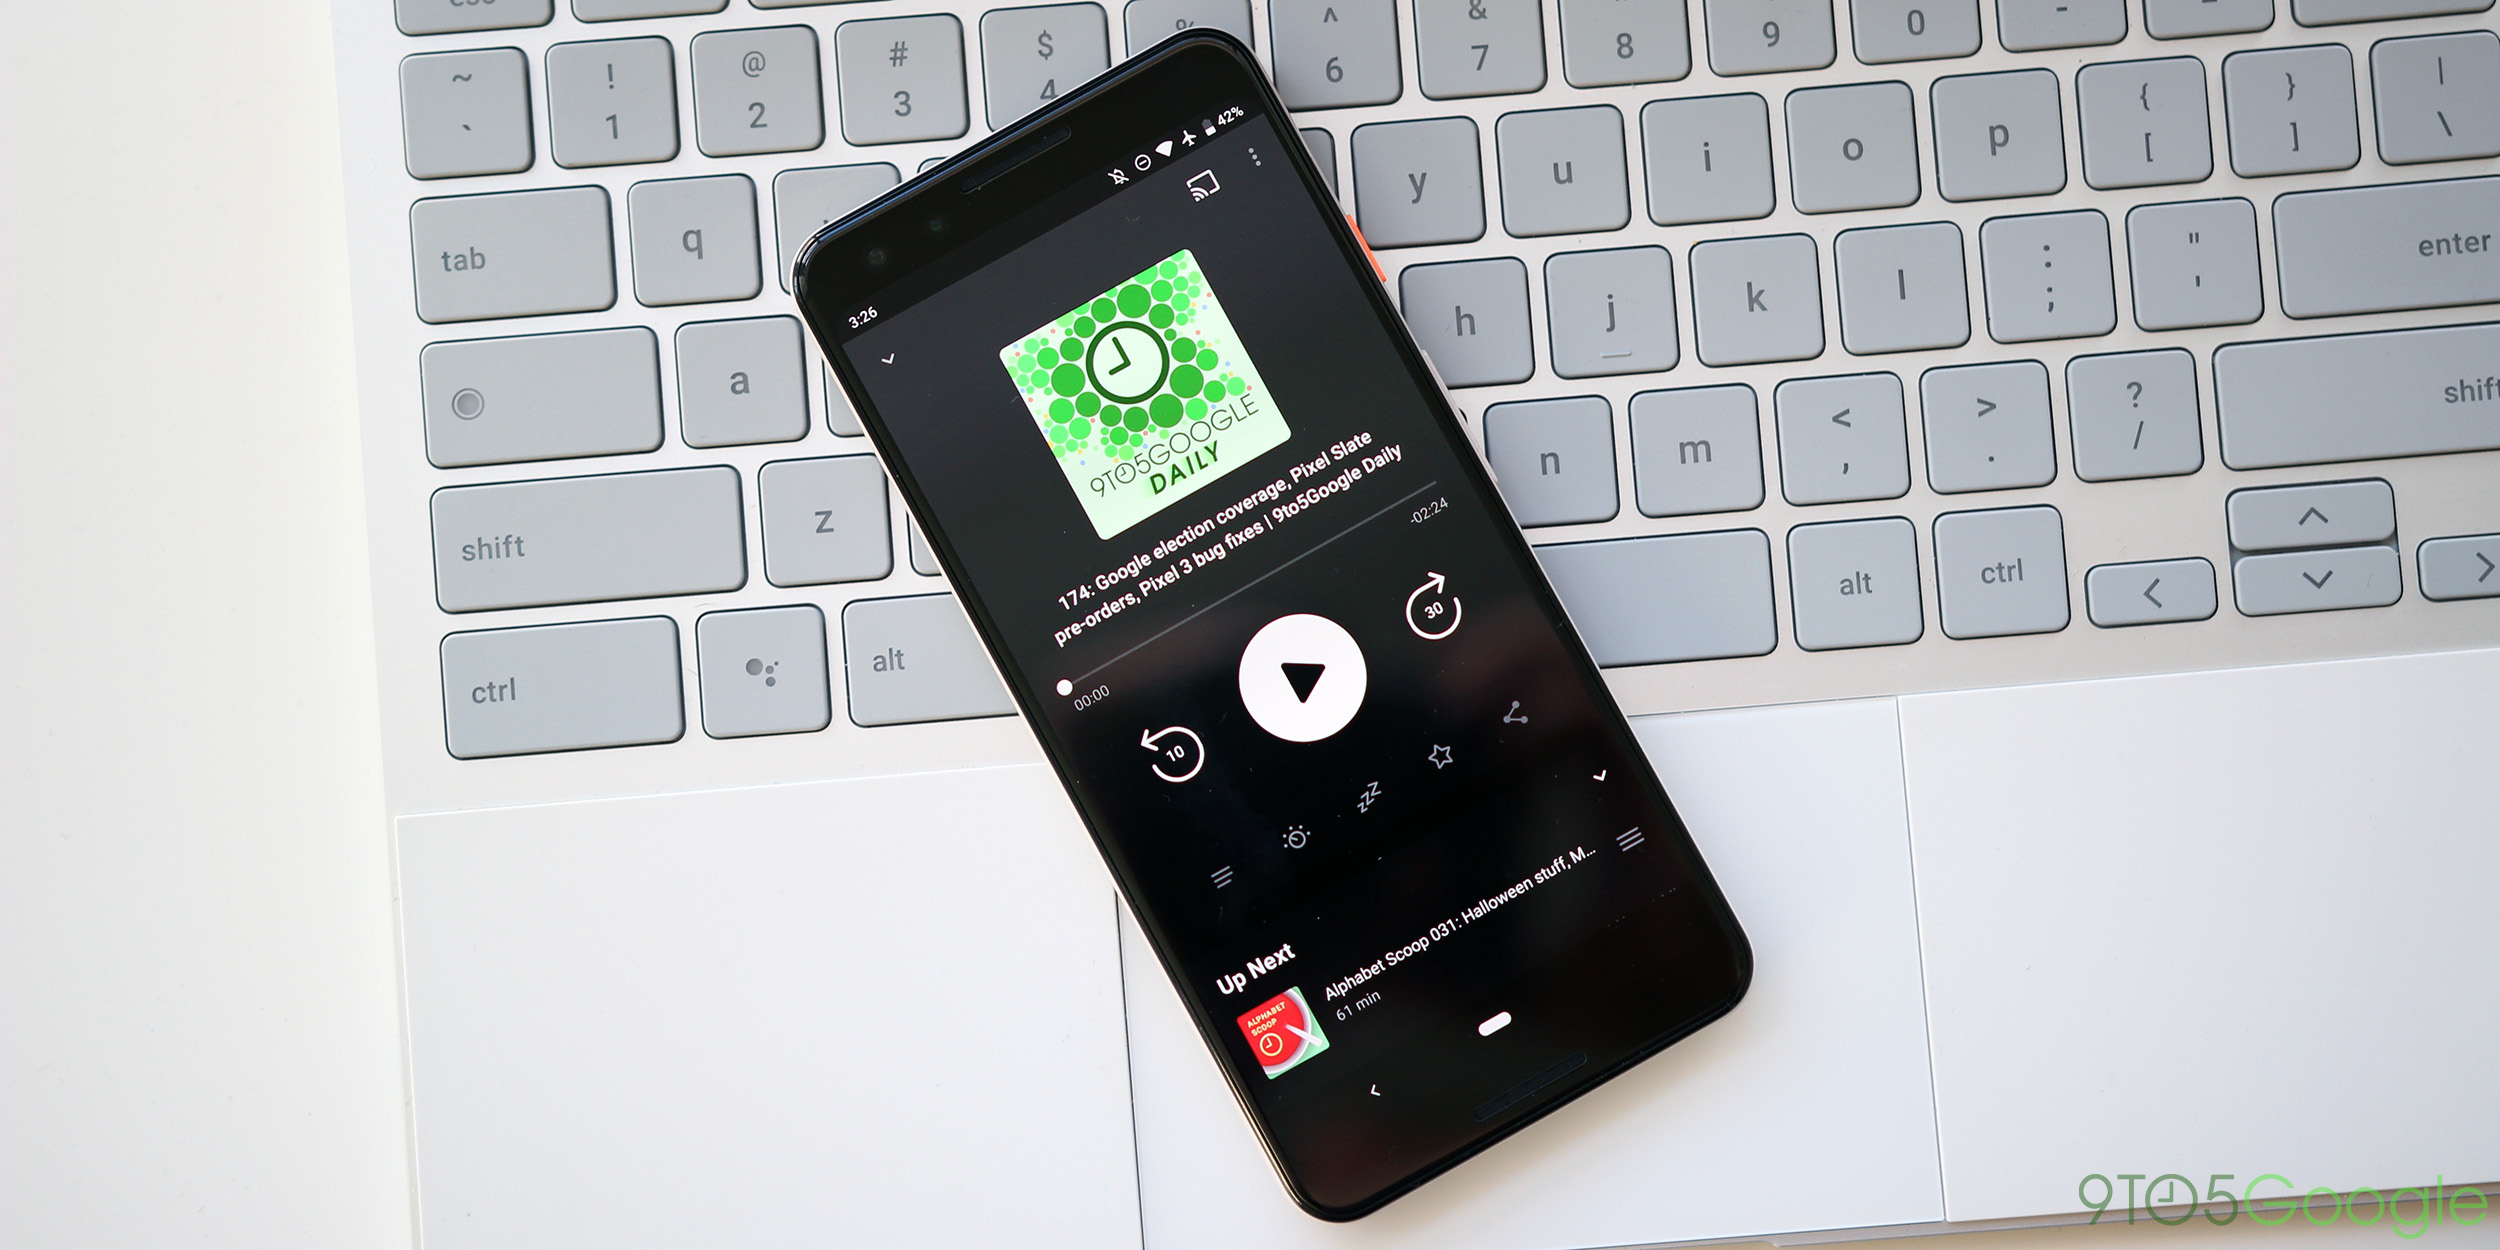 rss feed pocket casts